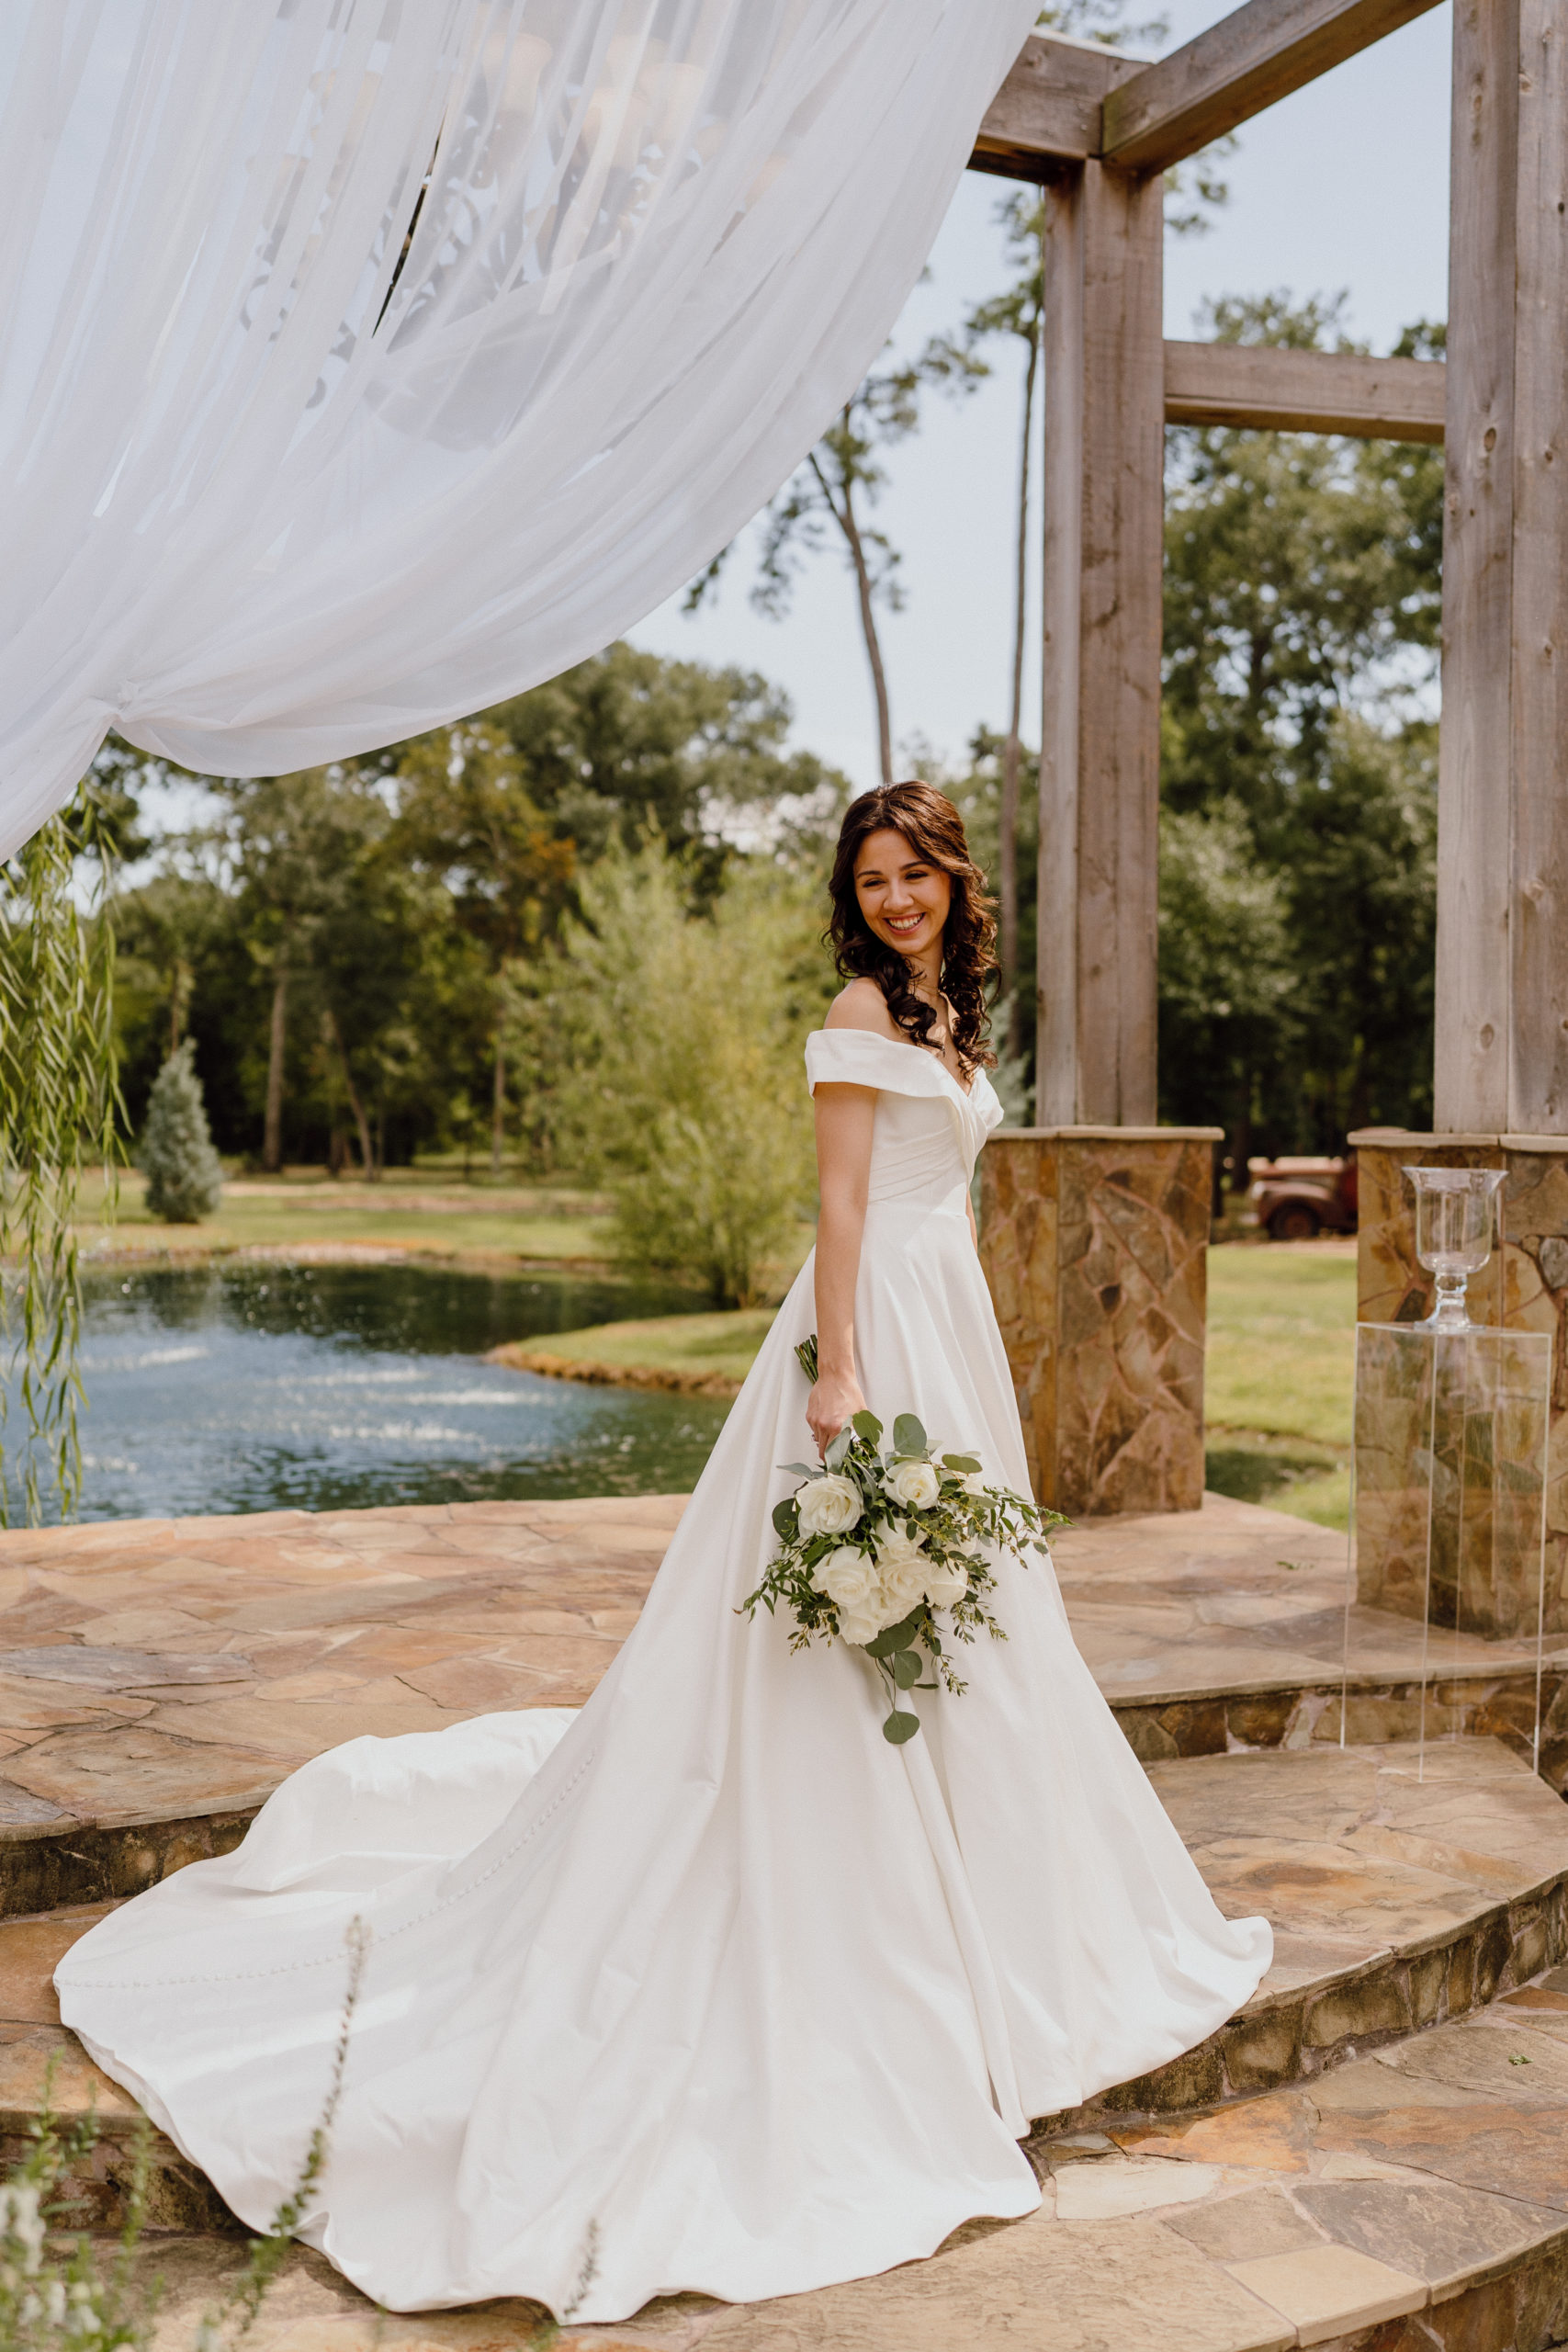 These timeless pre wedding bridal portraits took place at the Reserve at Cypress Creek. We explored the Texas venue to create stunning portraits. The brides italian inspired wedding gown and bouquet was the perfect combination for the editorial style wedding. This photojournalistic wedding was perfect in every way!